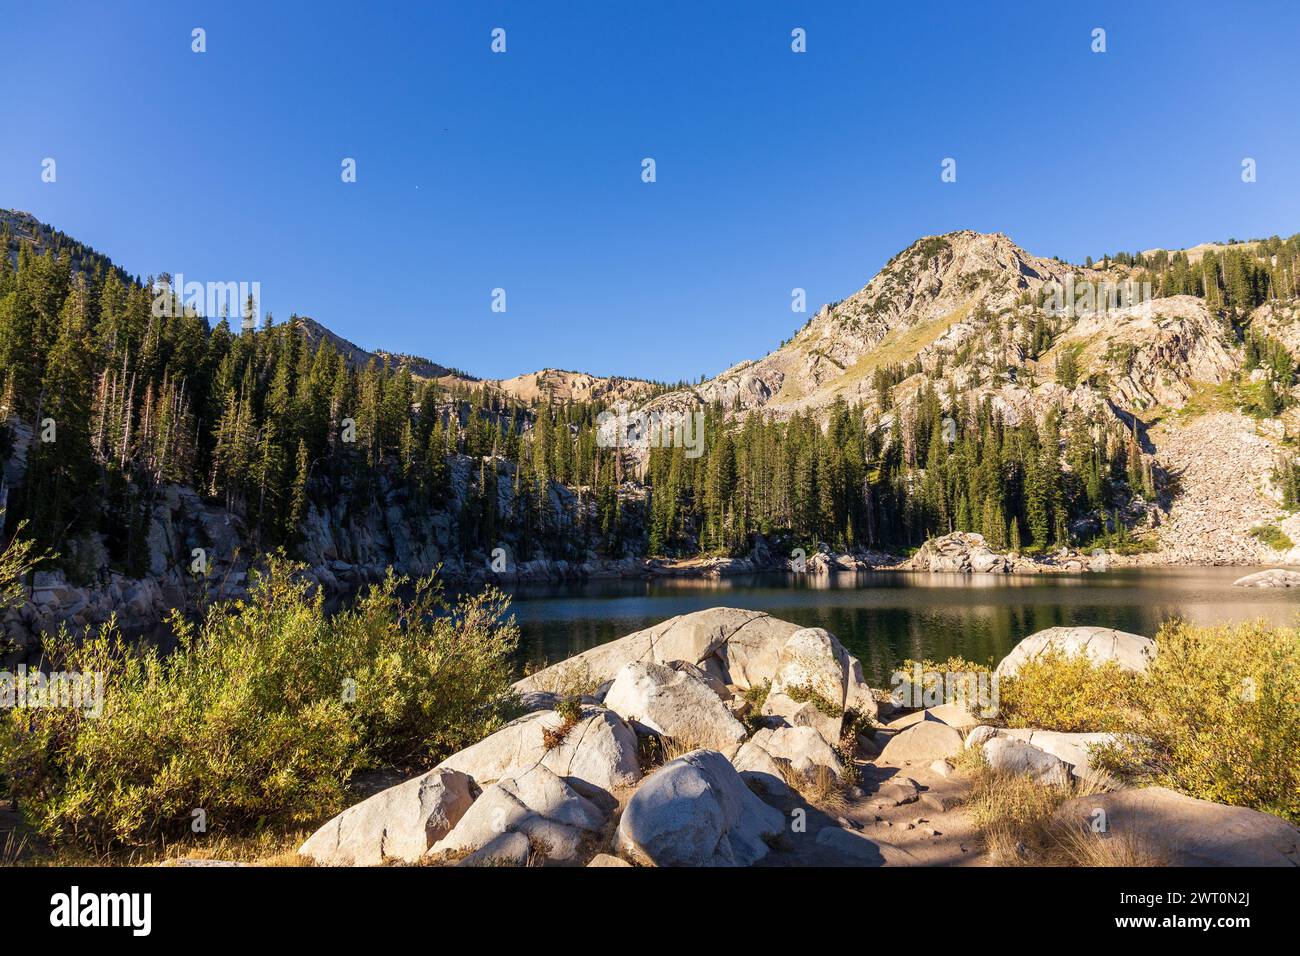 Lake Martha's Waters Embraced by Forested Slopes and Rocky Shores Stock Photo